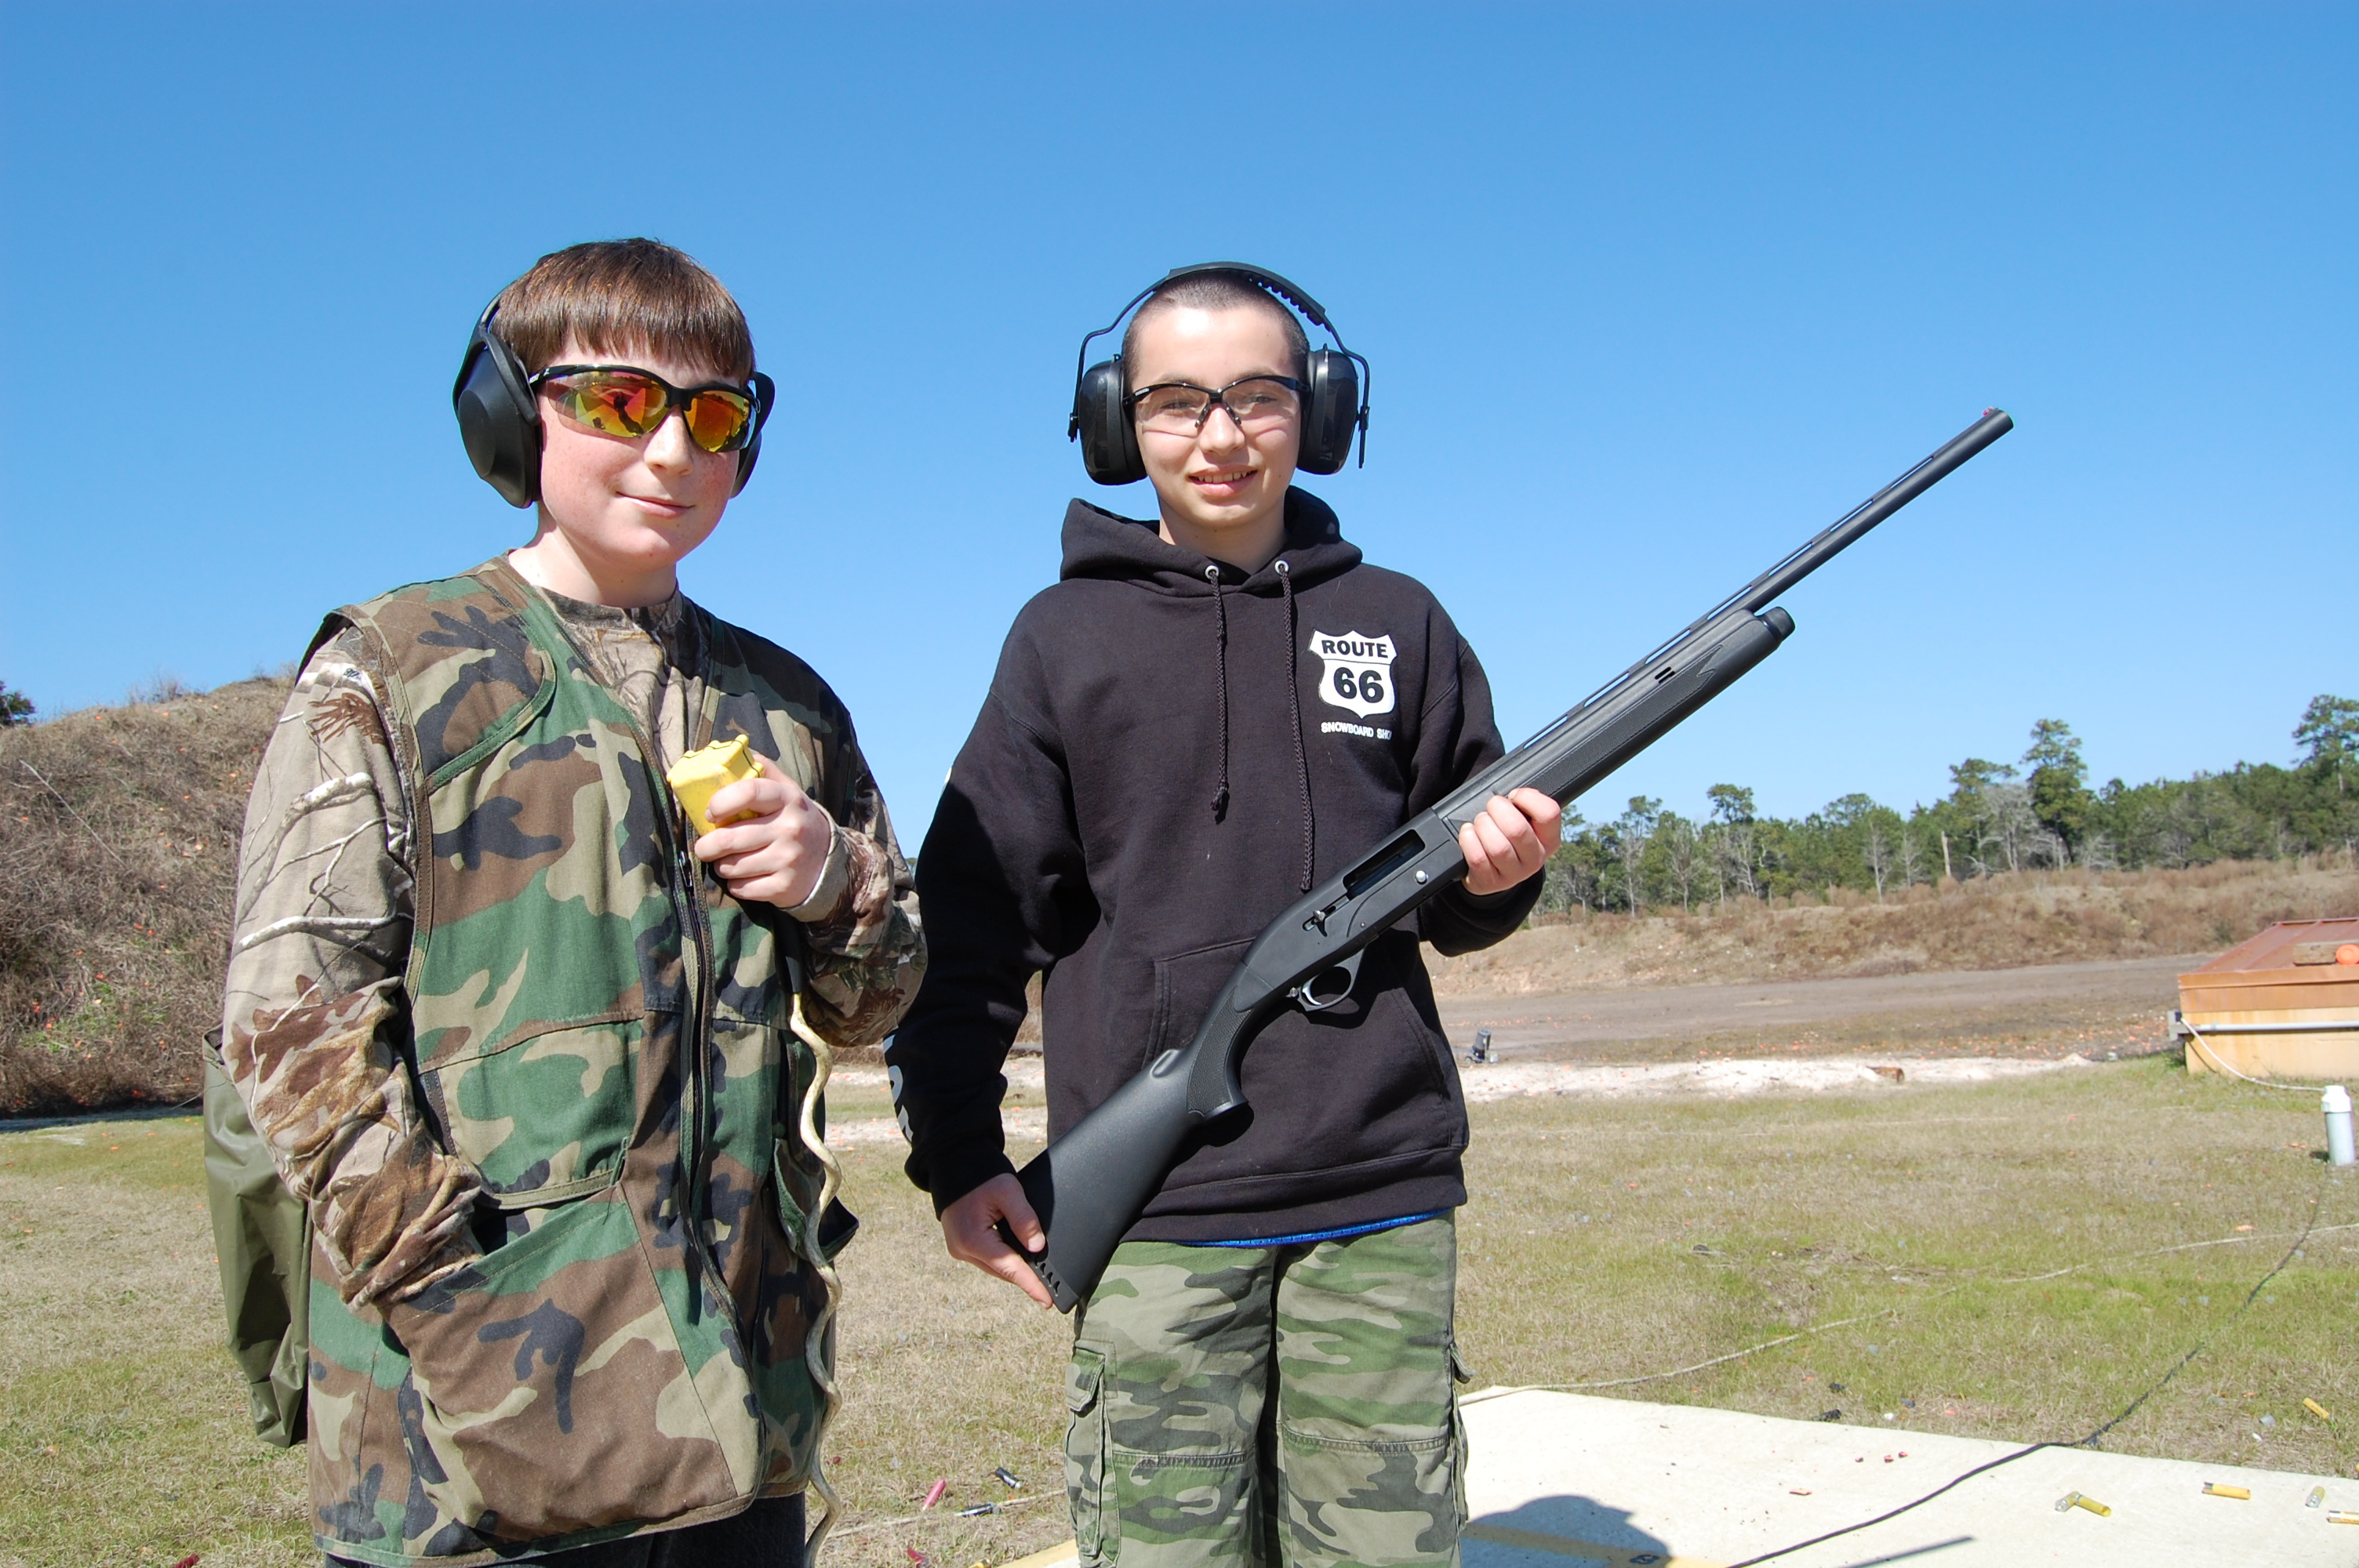 Hunters, Anglers Share Traditions with Youth